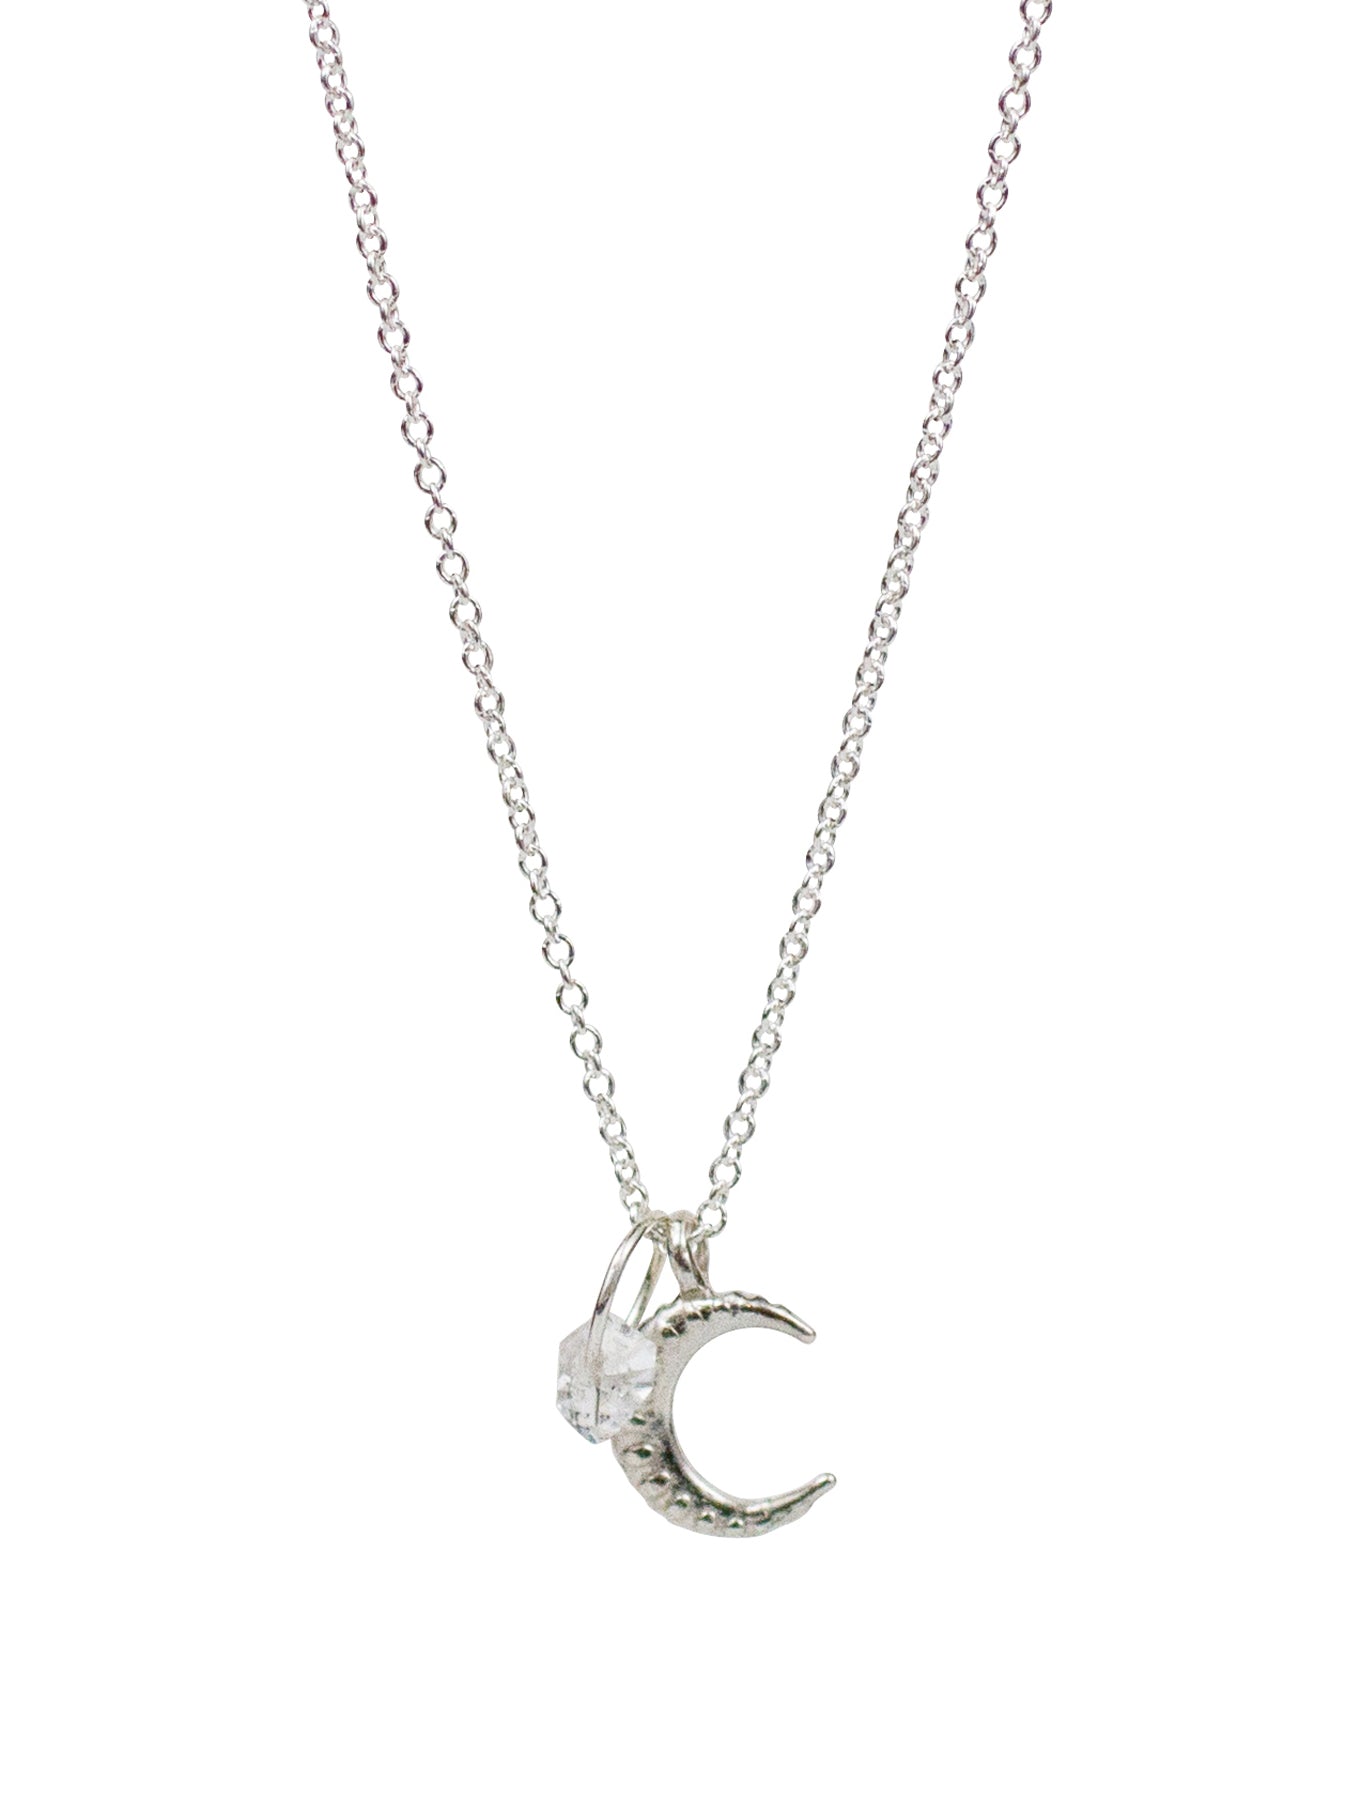 Artemis Necklace - small "goddess of the moon"